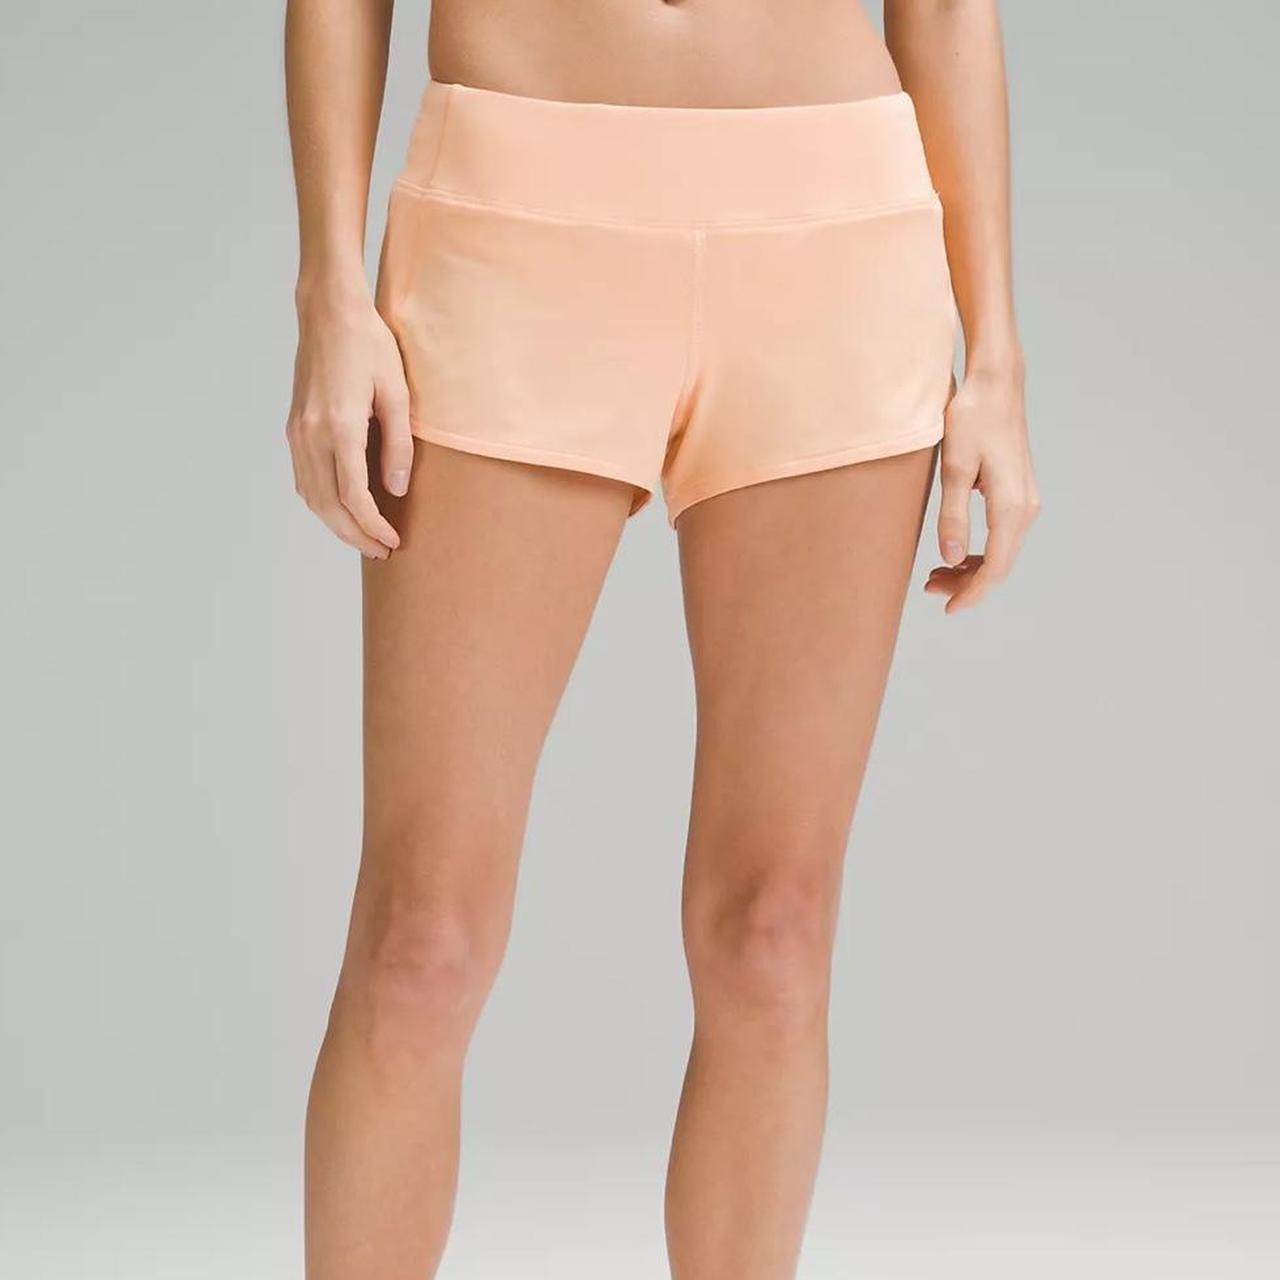 Speed Up Low-Rise Lined Short 2.5, Women's Shorts